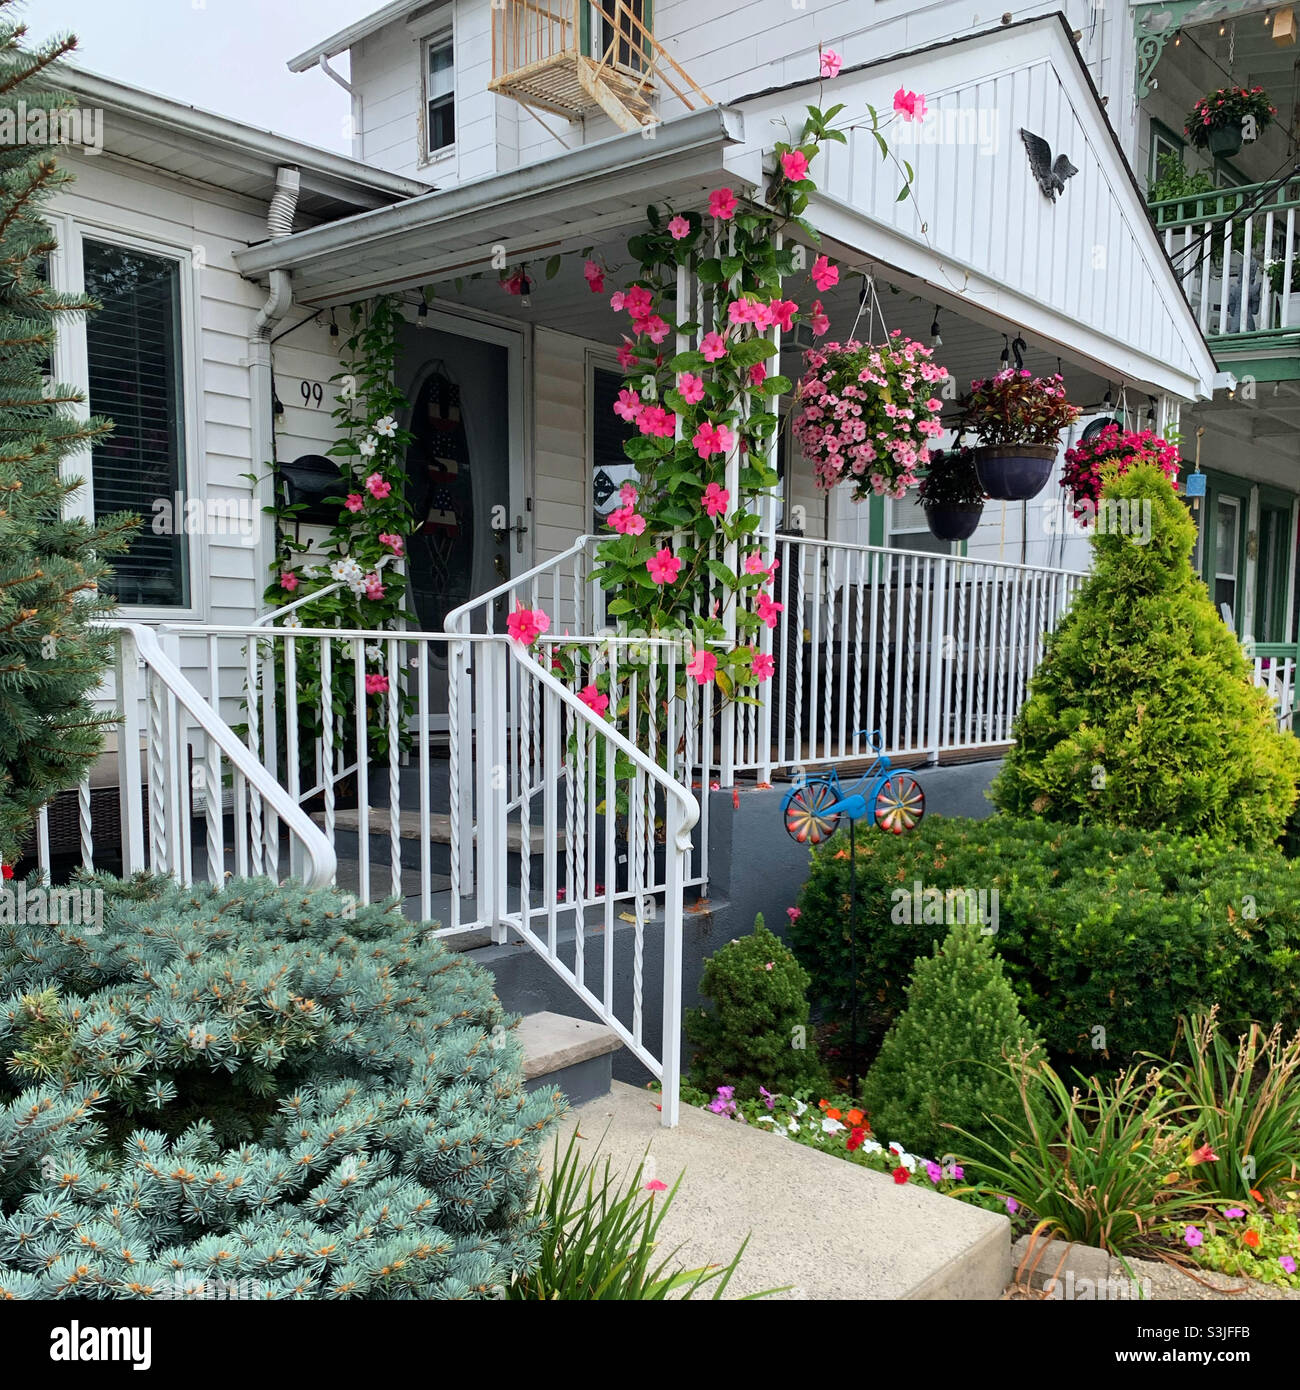 August 2021, die Vorderseite eines Hauses in Ocean Grove, Neptune Township, Monmouth County, New Jersey, USA Stockfoto